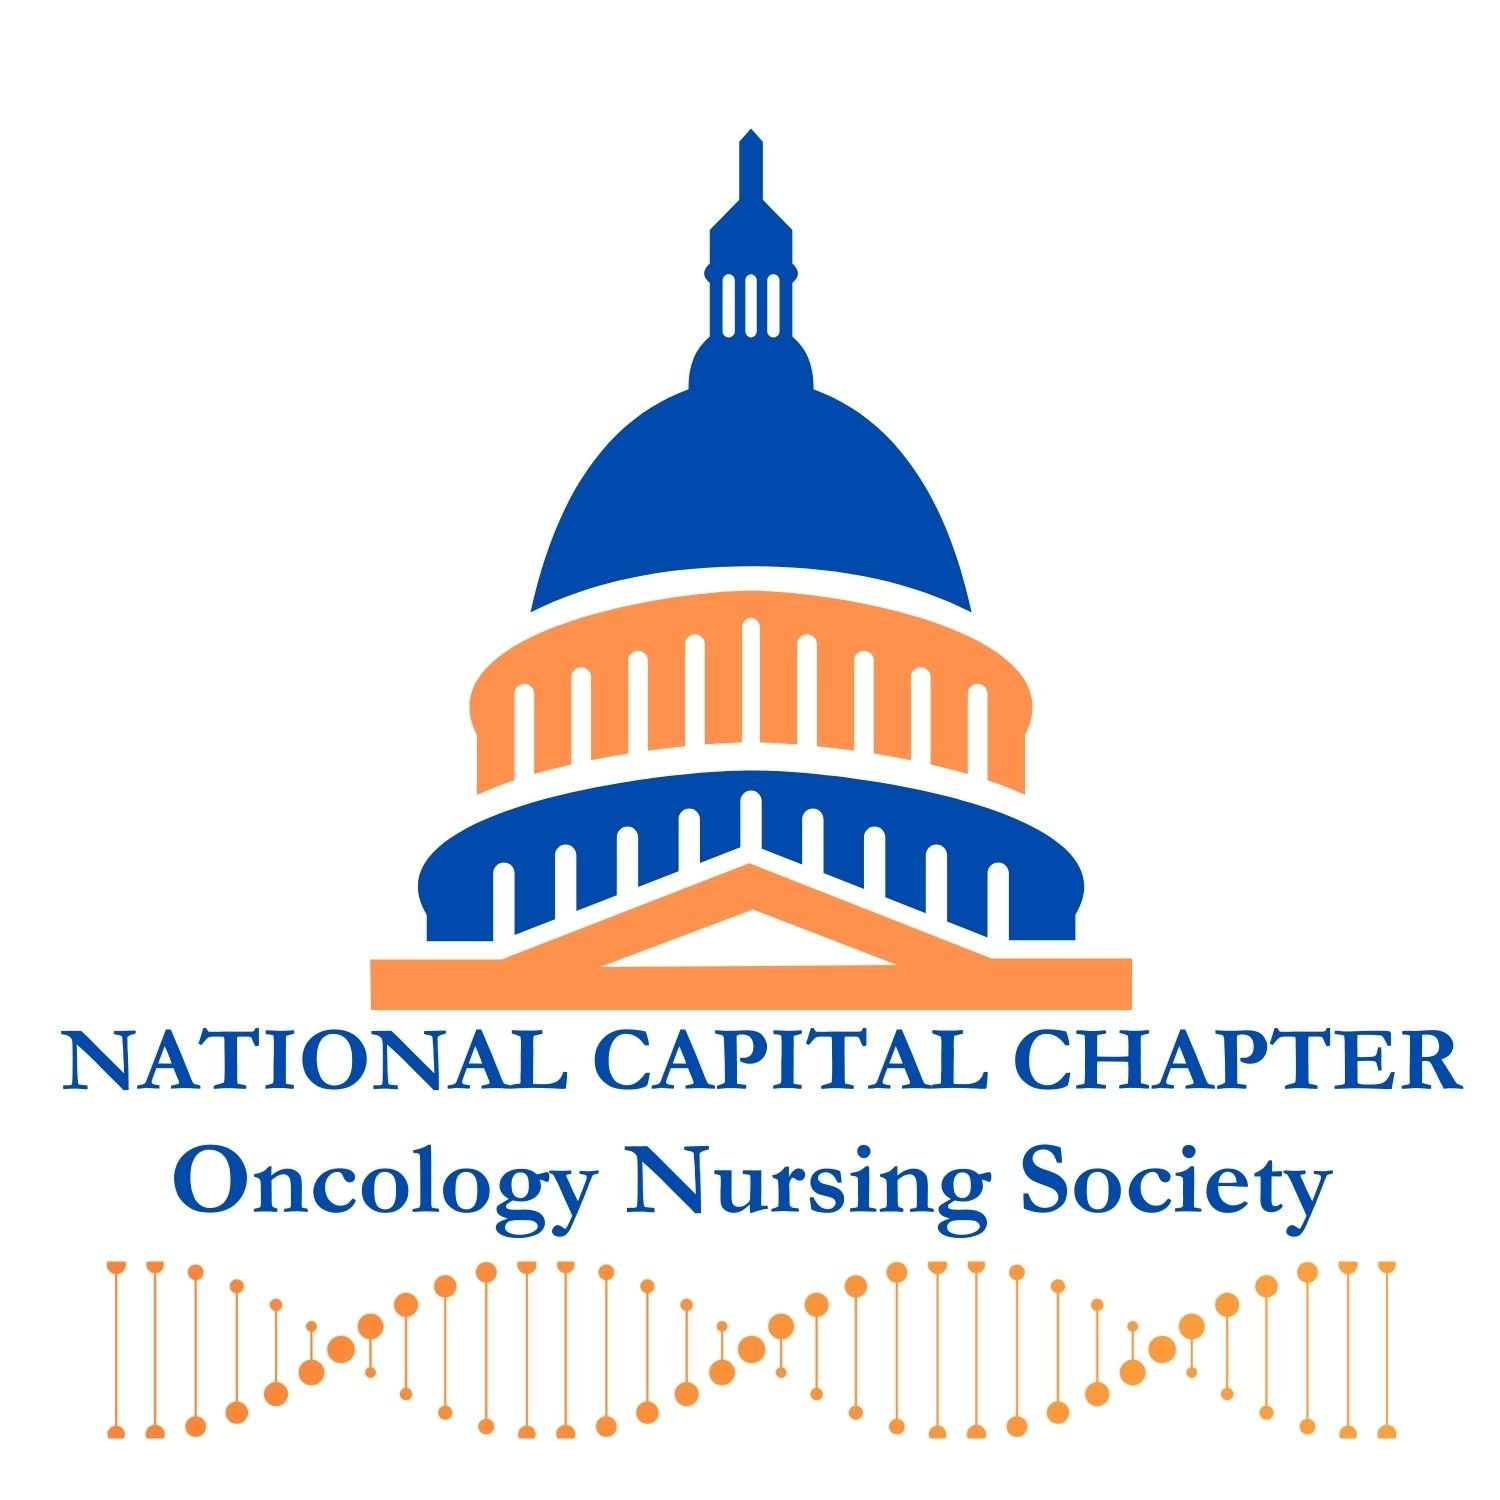 Oncology Nursing Society National Capital Chapter